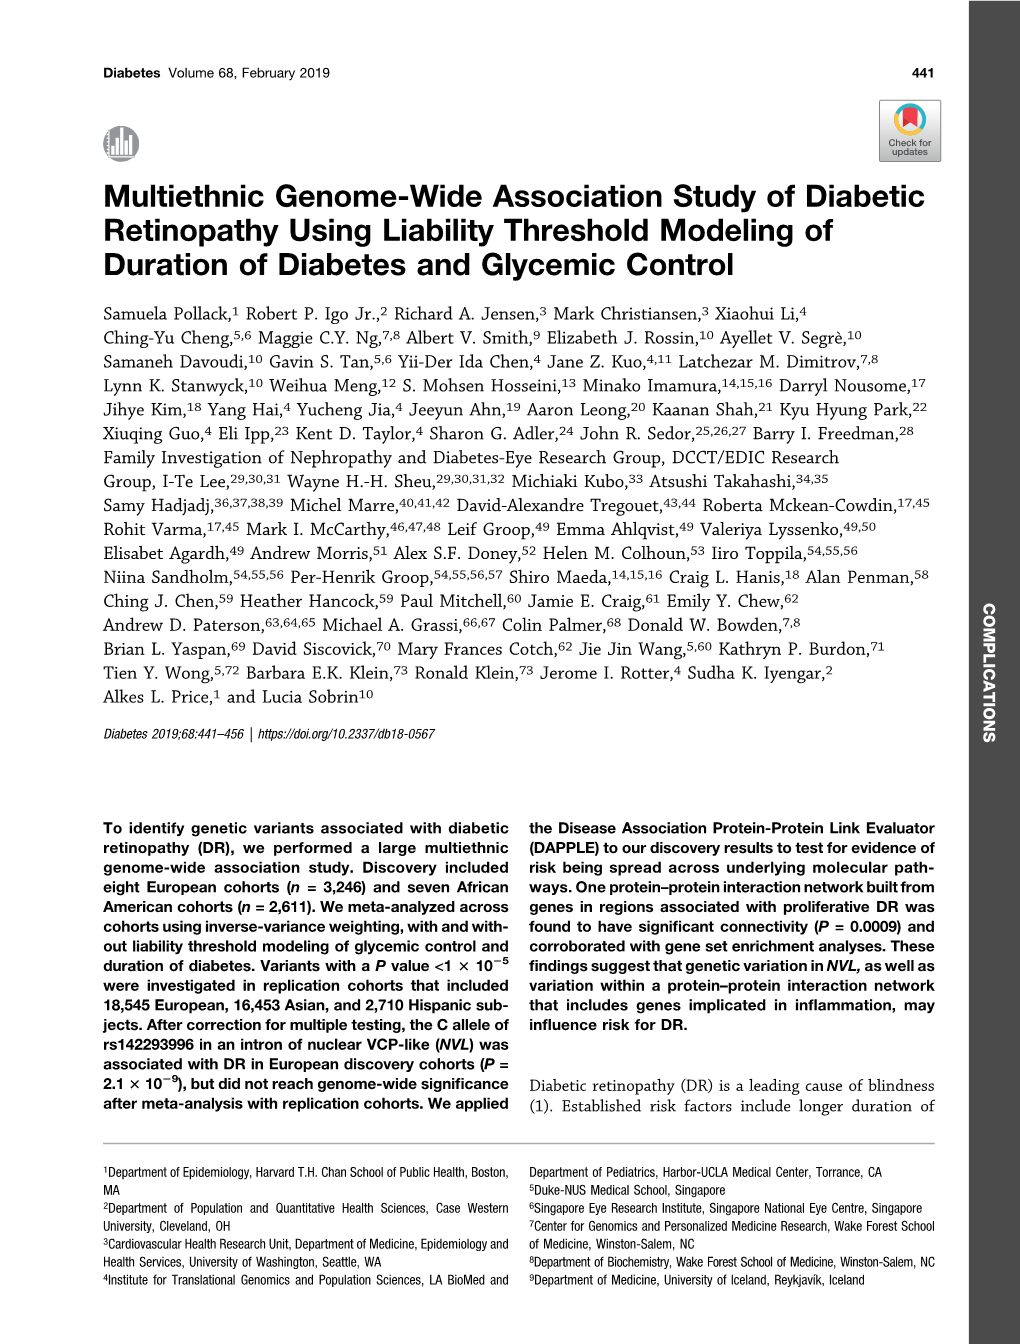 Multiethnic Genome-Wide Association Study of Diabetic Retinopathy Using Liability Threshold Modeling of Duration of Diabetes and Glycemic Control